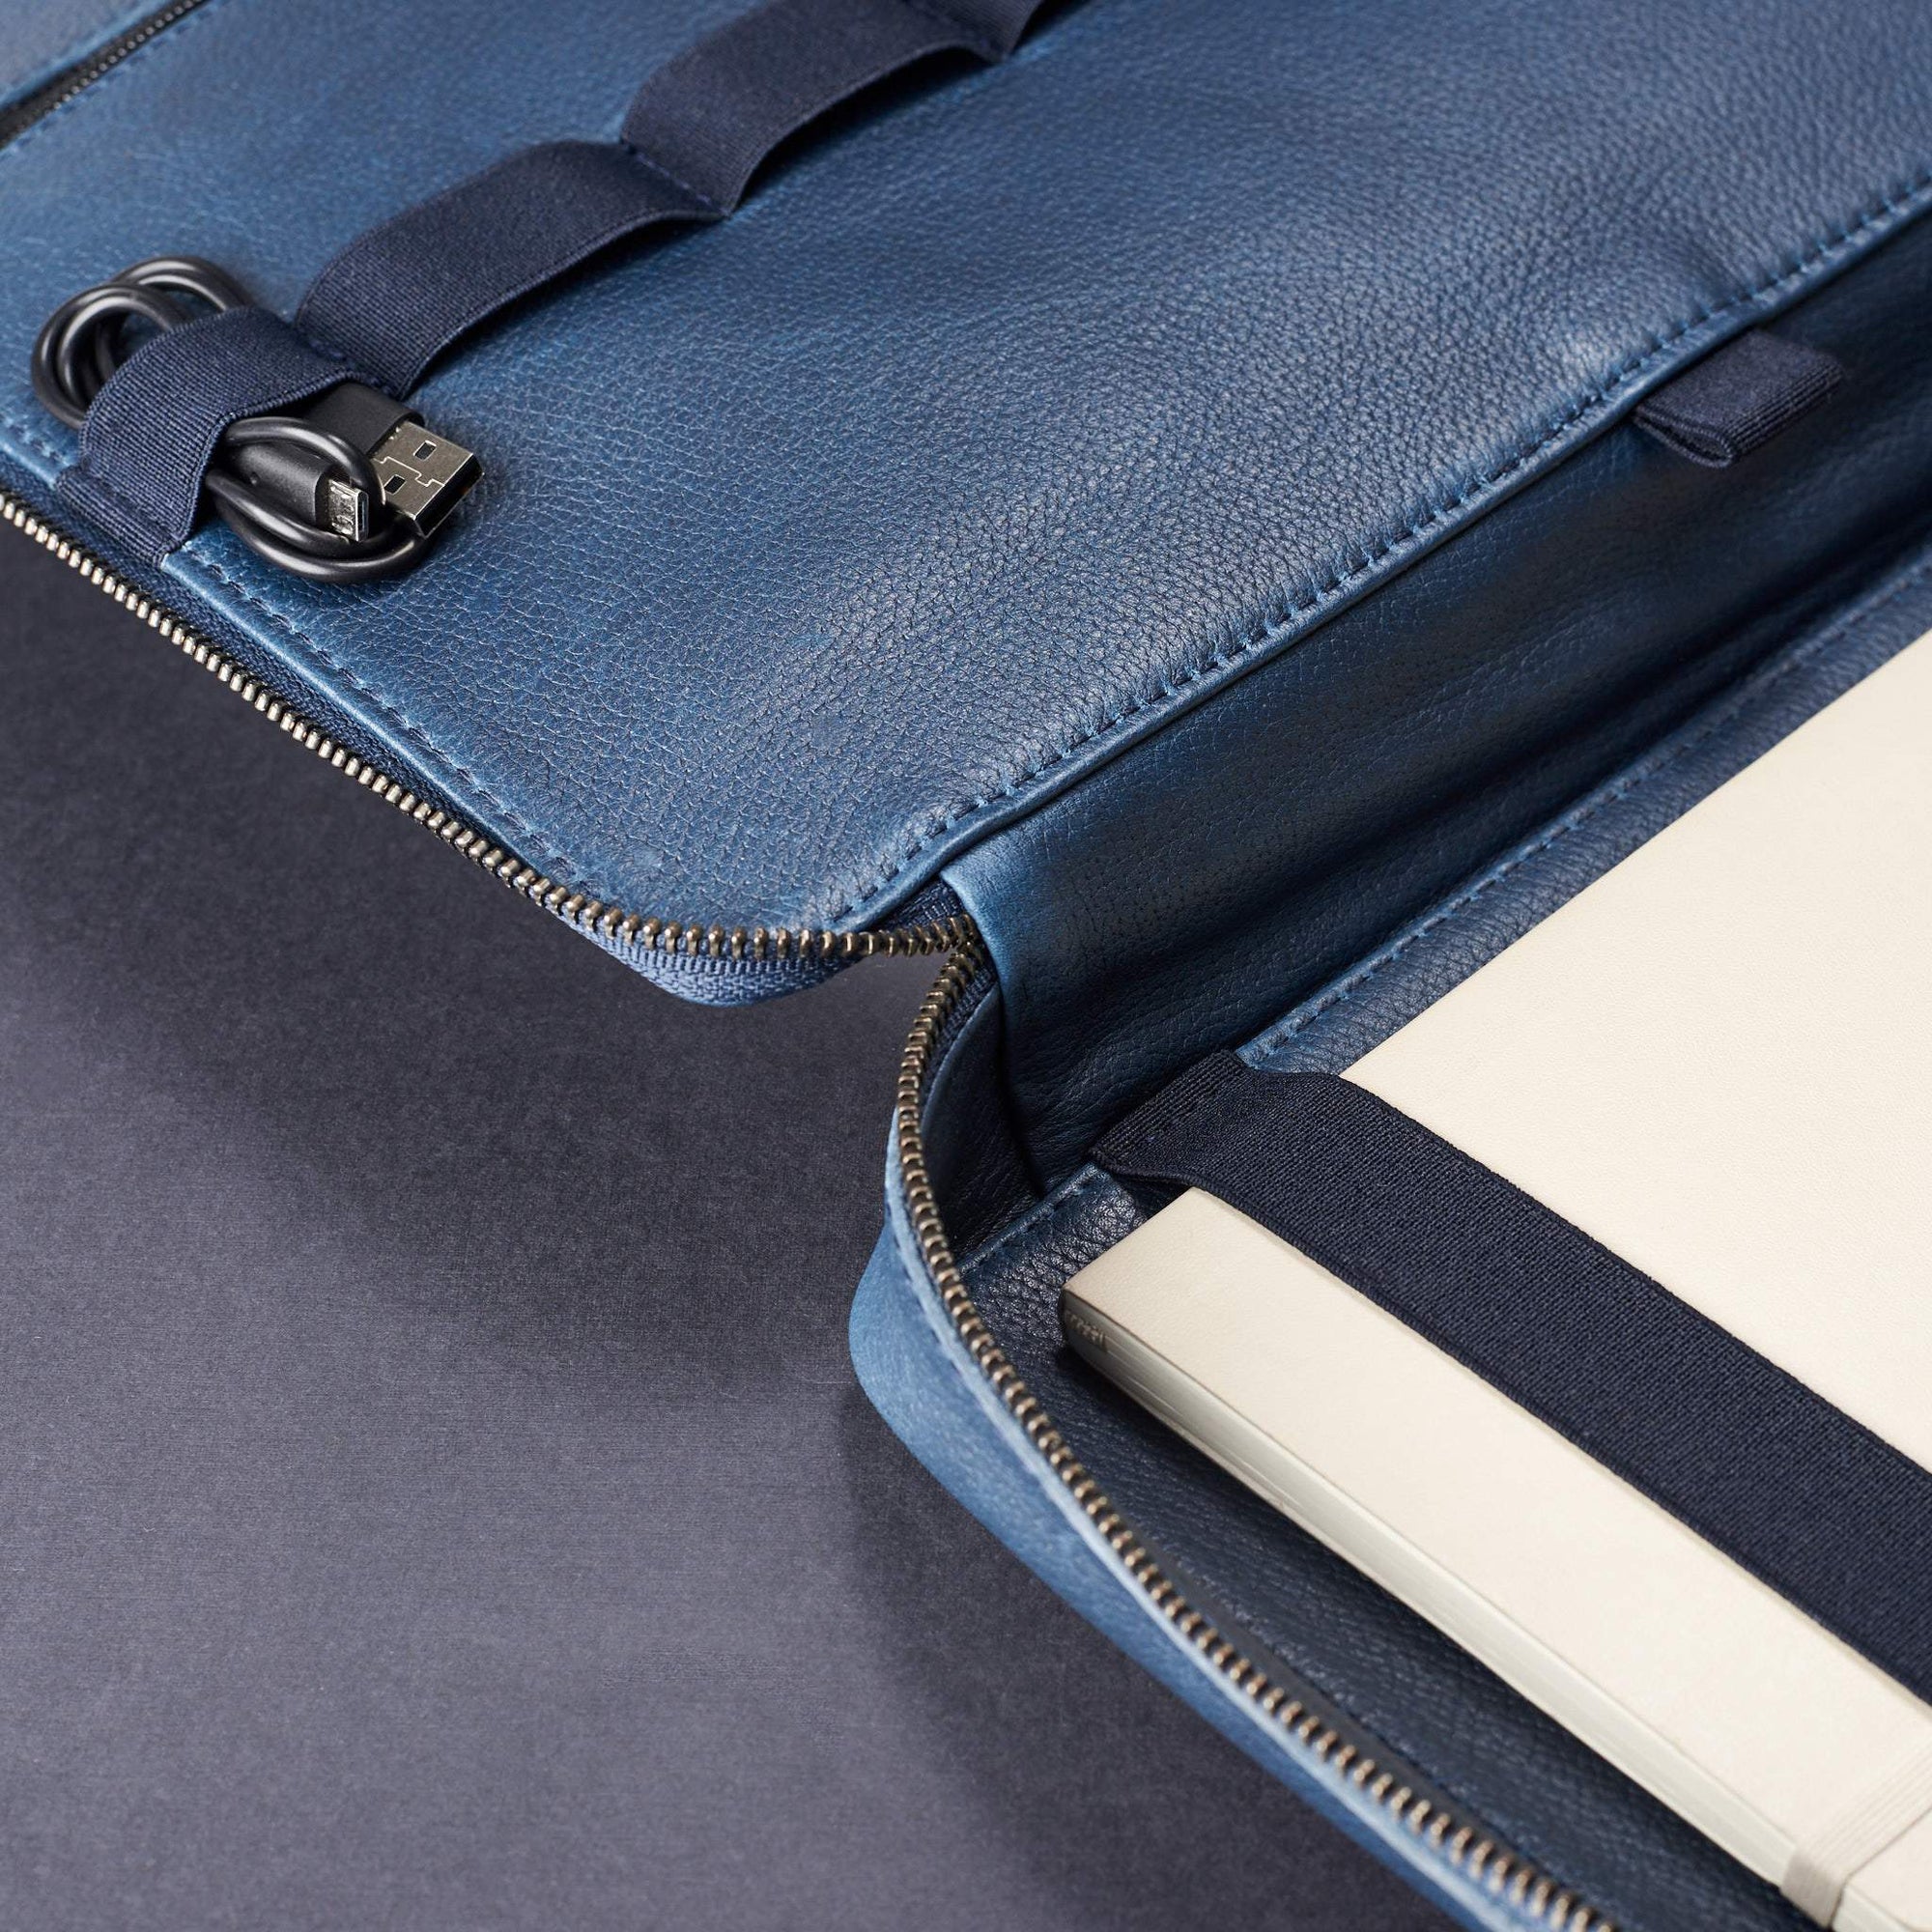 Leather lining interior. Navy blue EDC laptop bag by Capra Leather